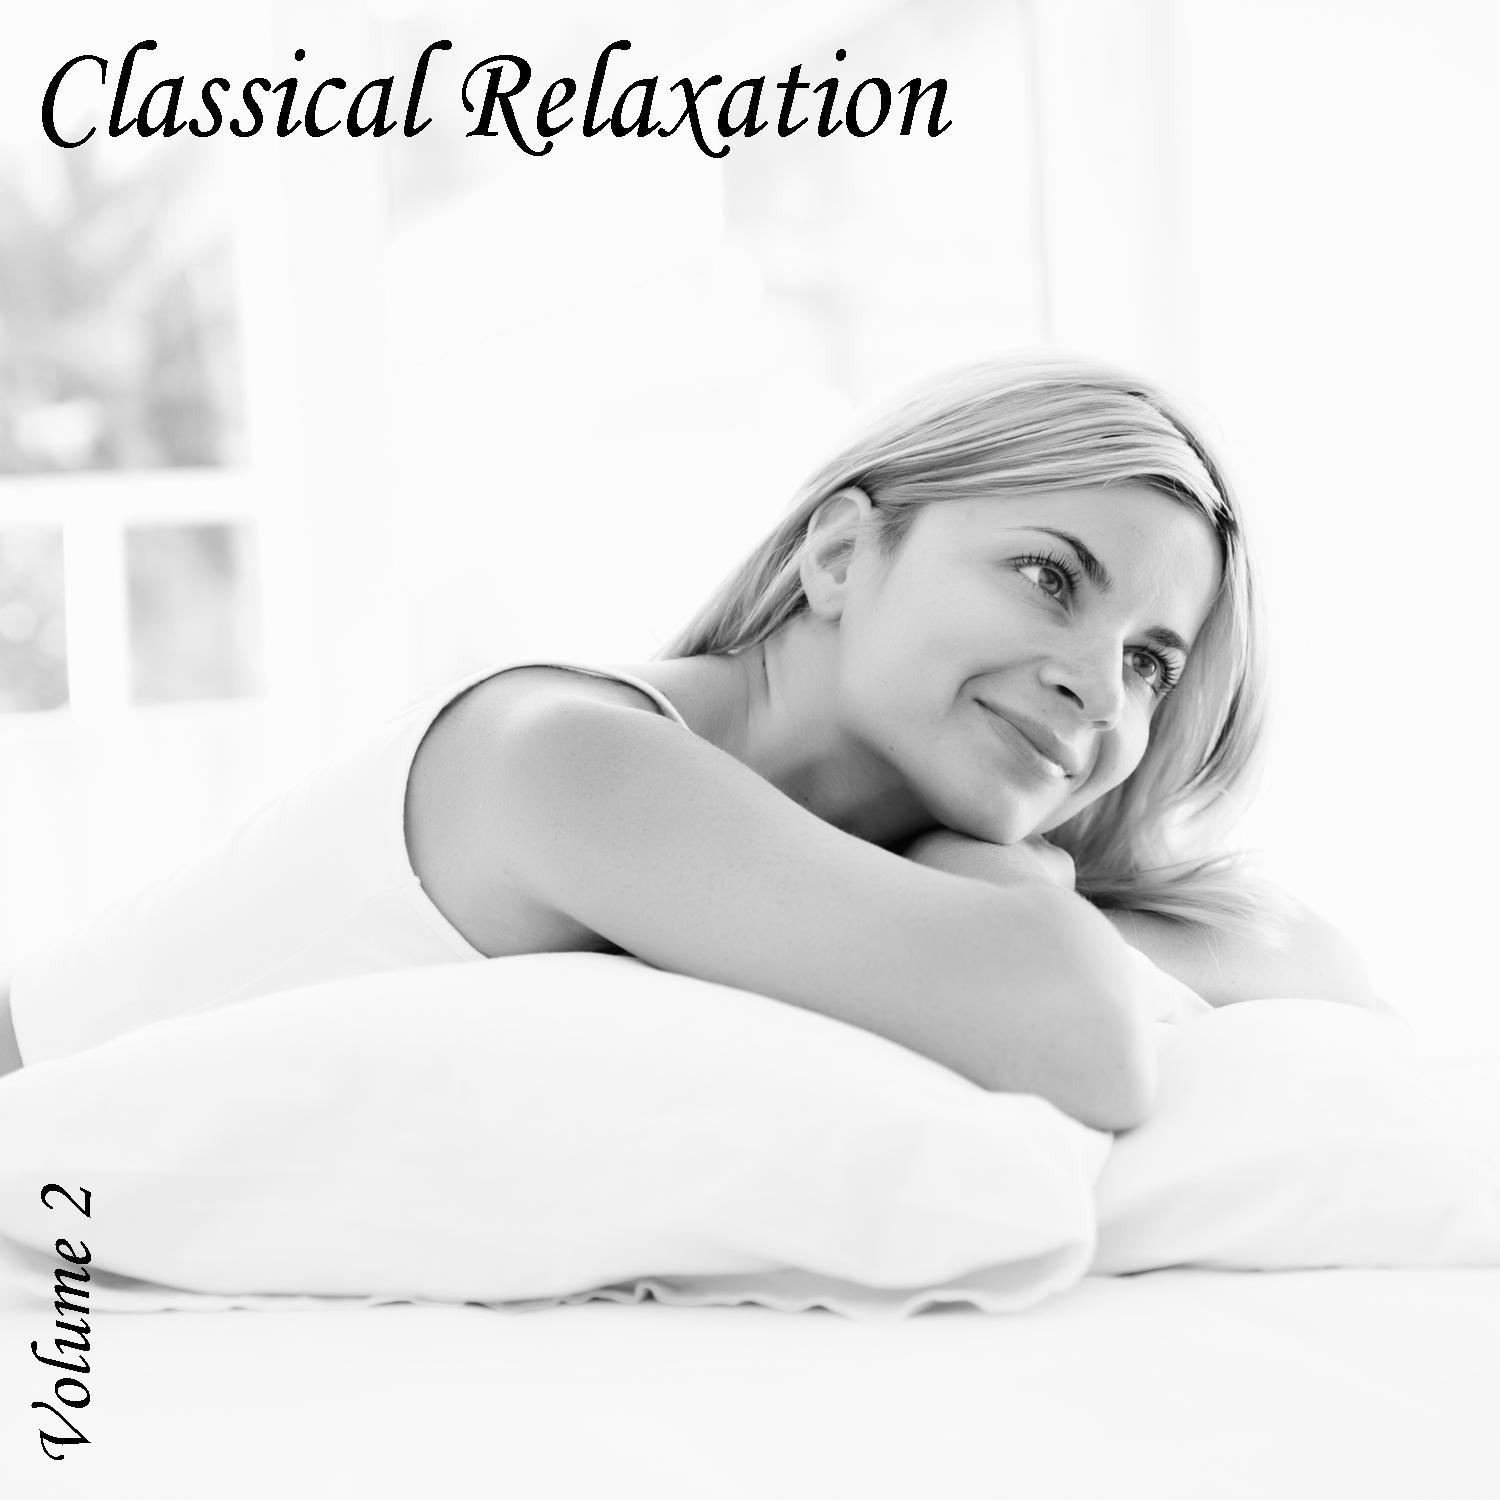 Classical Relaxation CD2